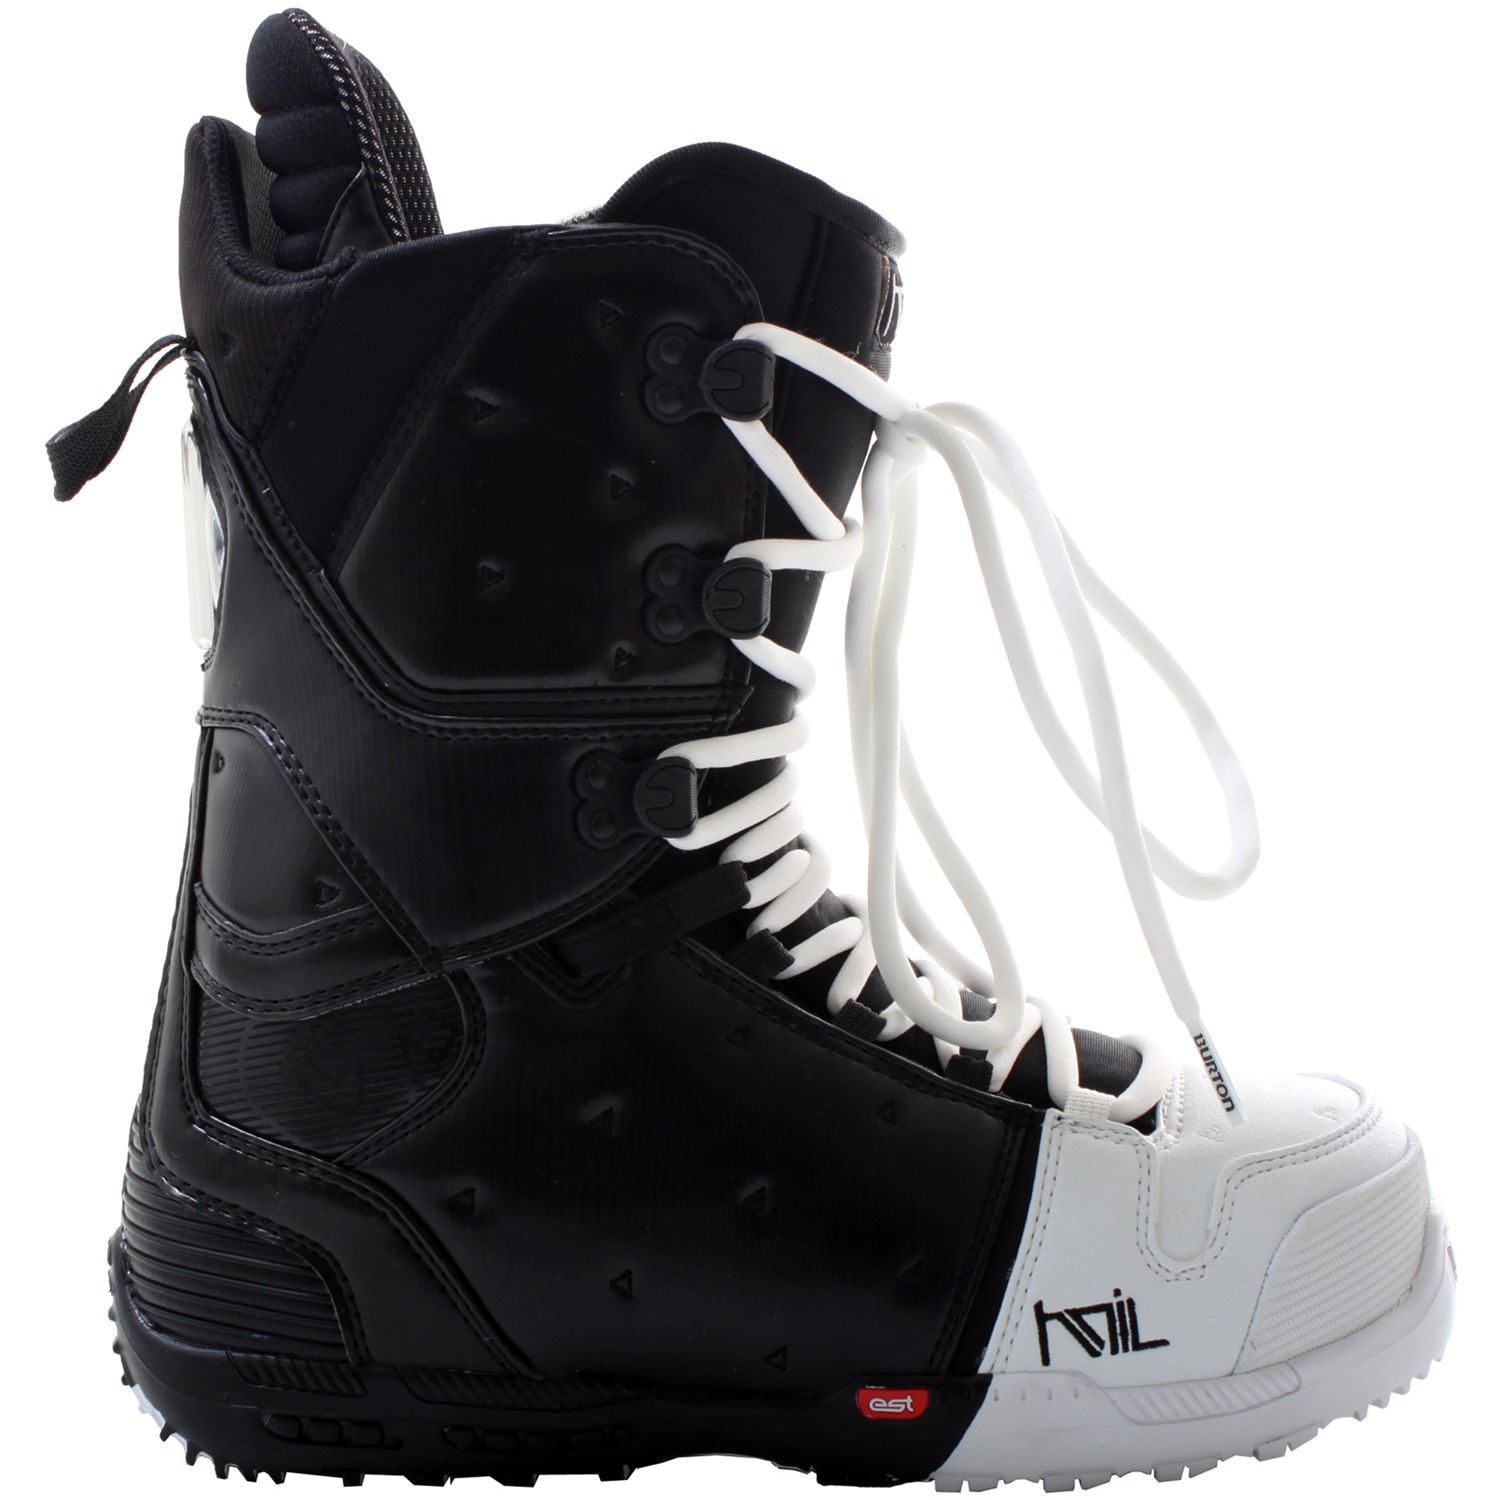 Motley Contempt Engaged Burton Hail Restricted Snowboard Boots 2011 | evo